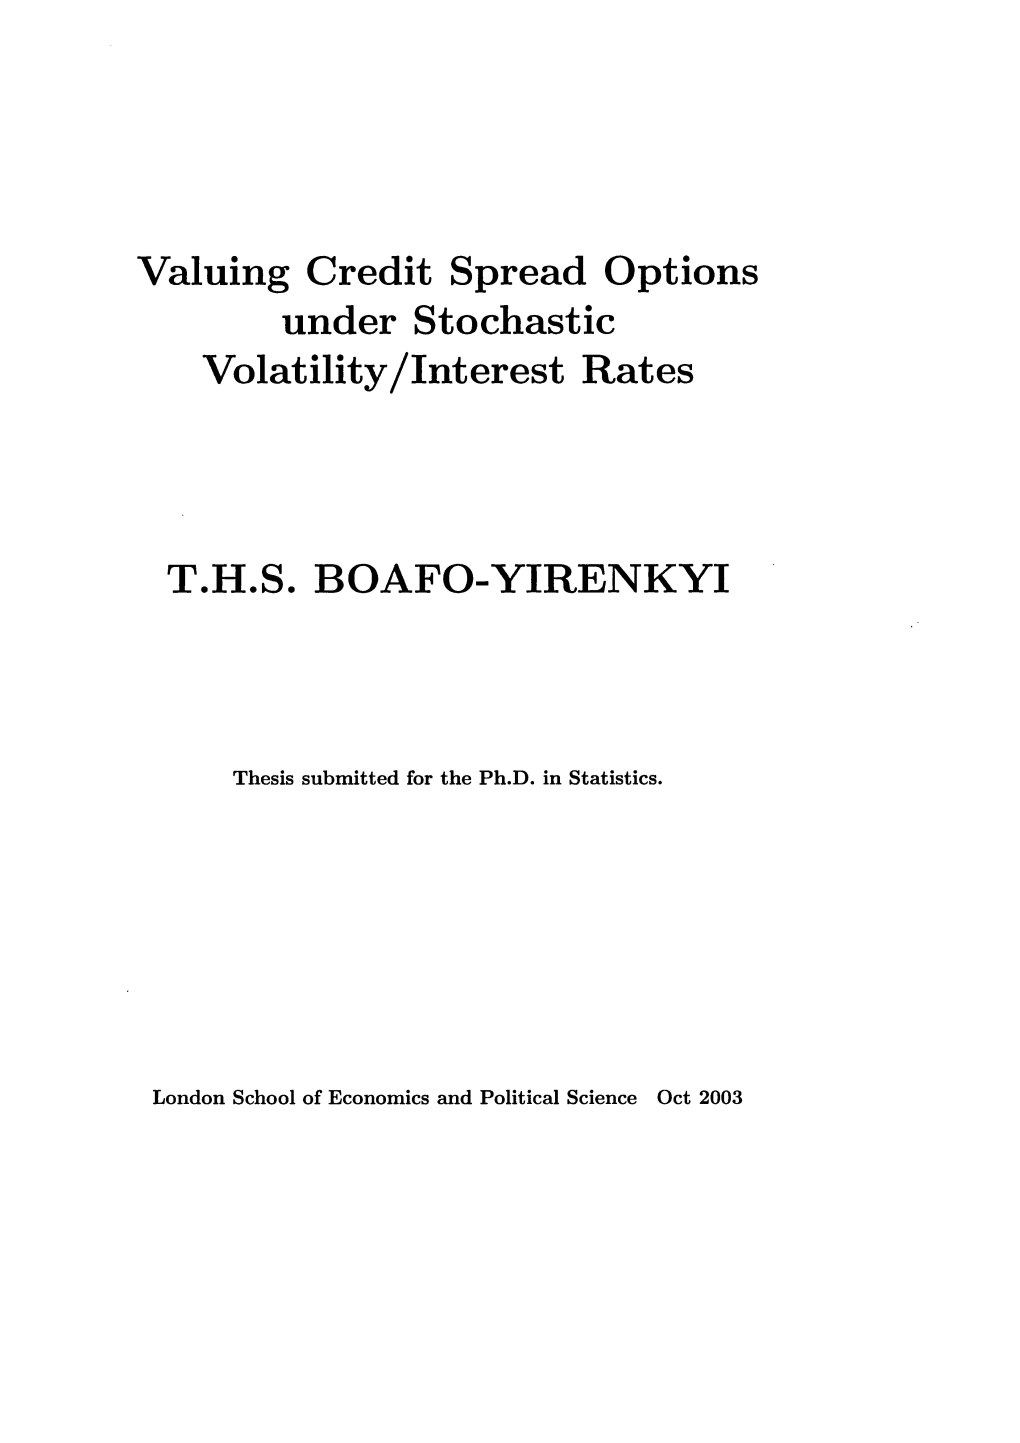 Valuing Credit Spread Options Under Stochastic Volatility/Interest Rates